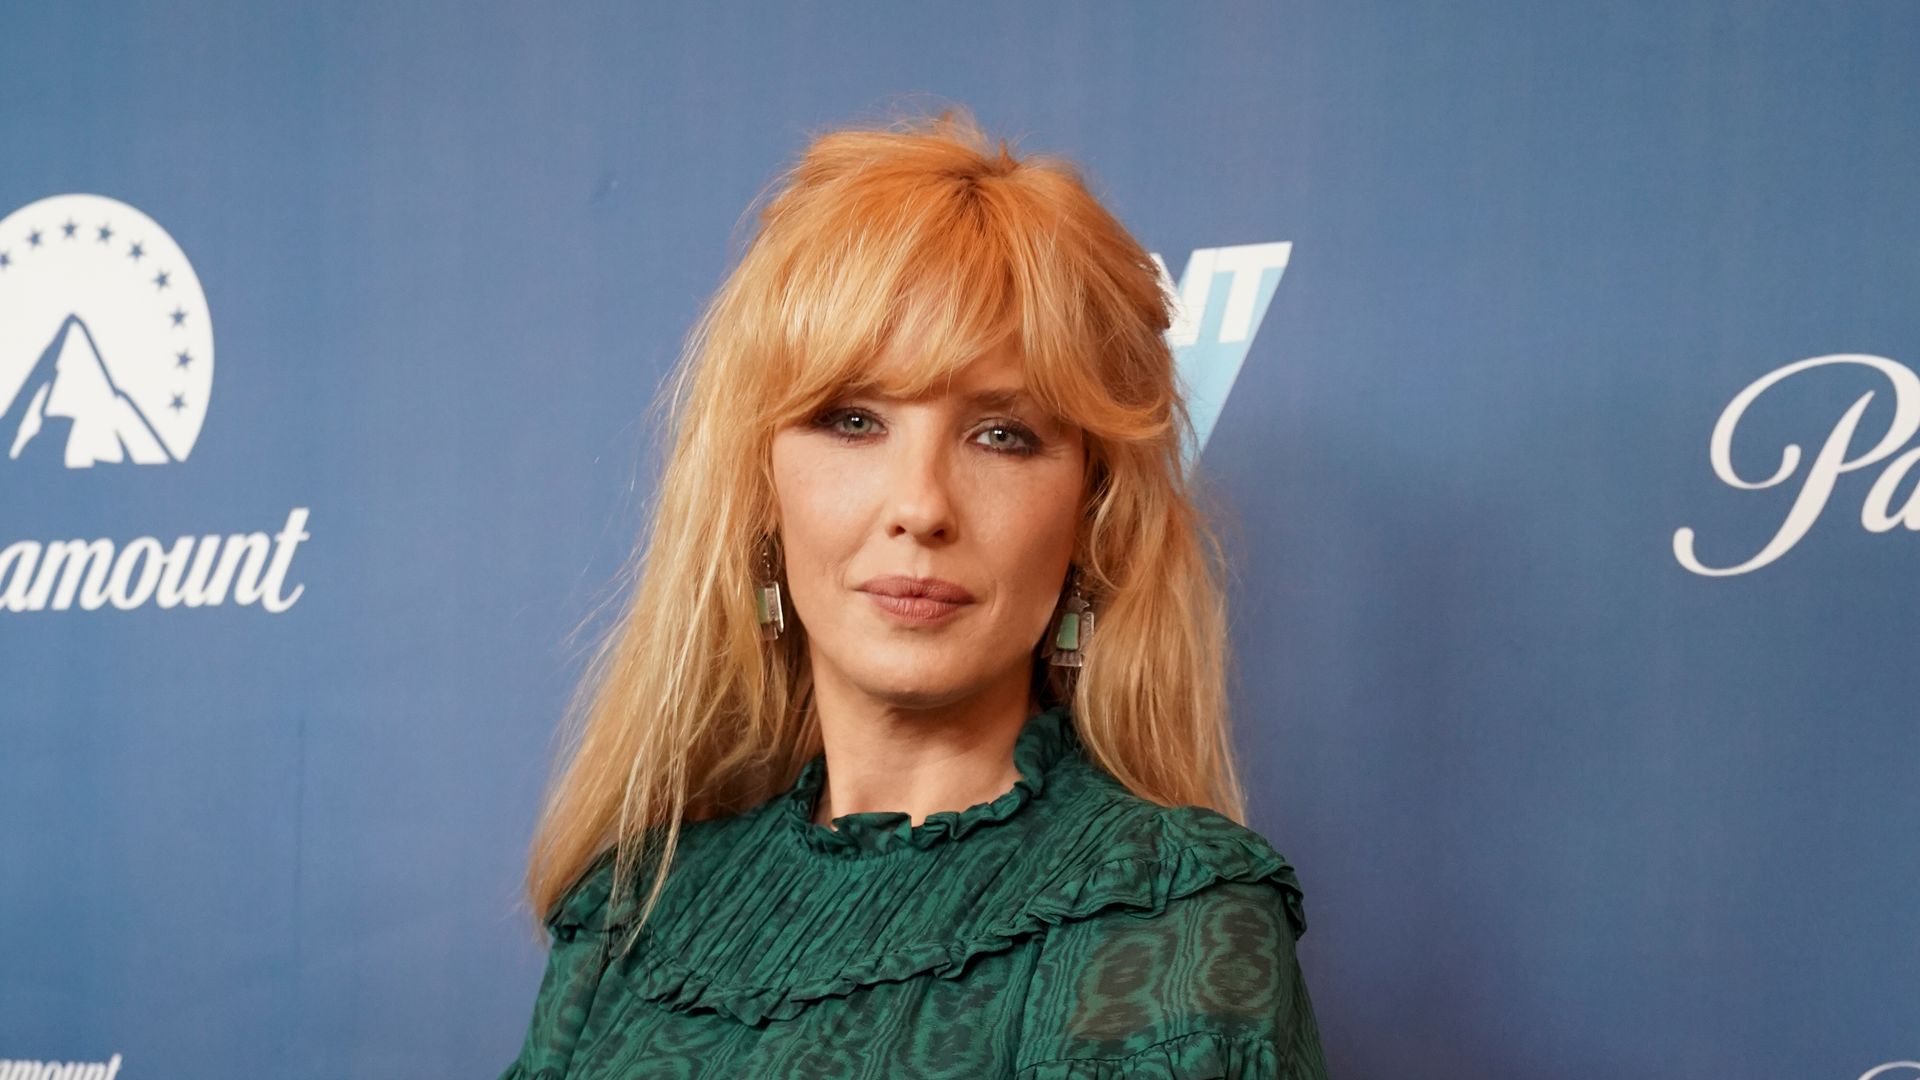 Kelly Reilly at Paramount's 2022-2023 Upfront event today, Wednesday, May 18, 2022 at Carnegie Hall in New York City